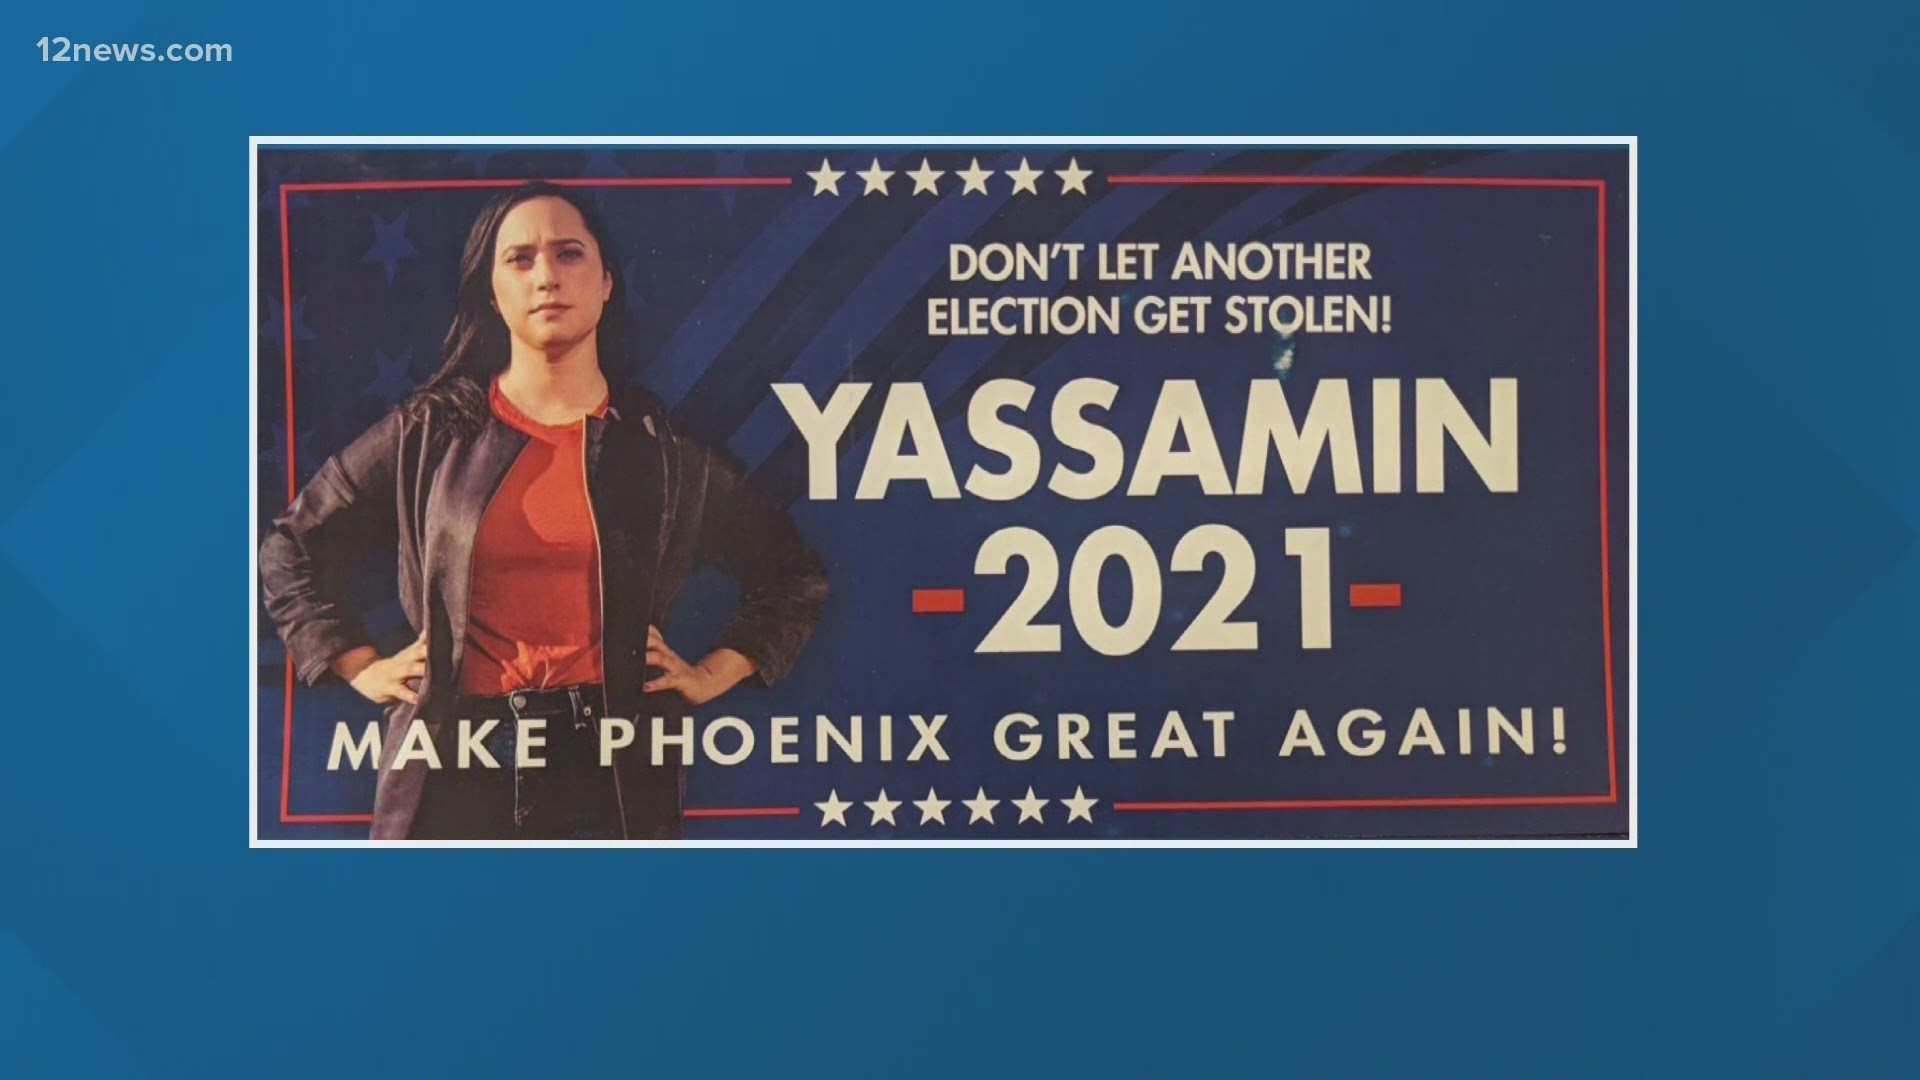 Dirty politics are showing up in a Phoenix City Council race. An ad, funded by dark money, is portraying a progressive Democrat candidate as a Trump suppoter.